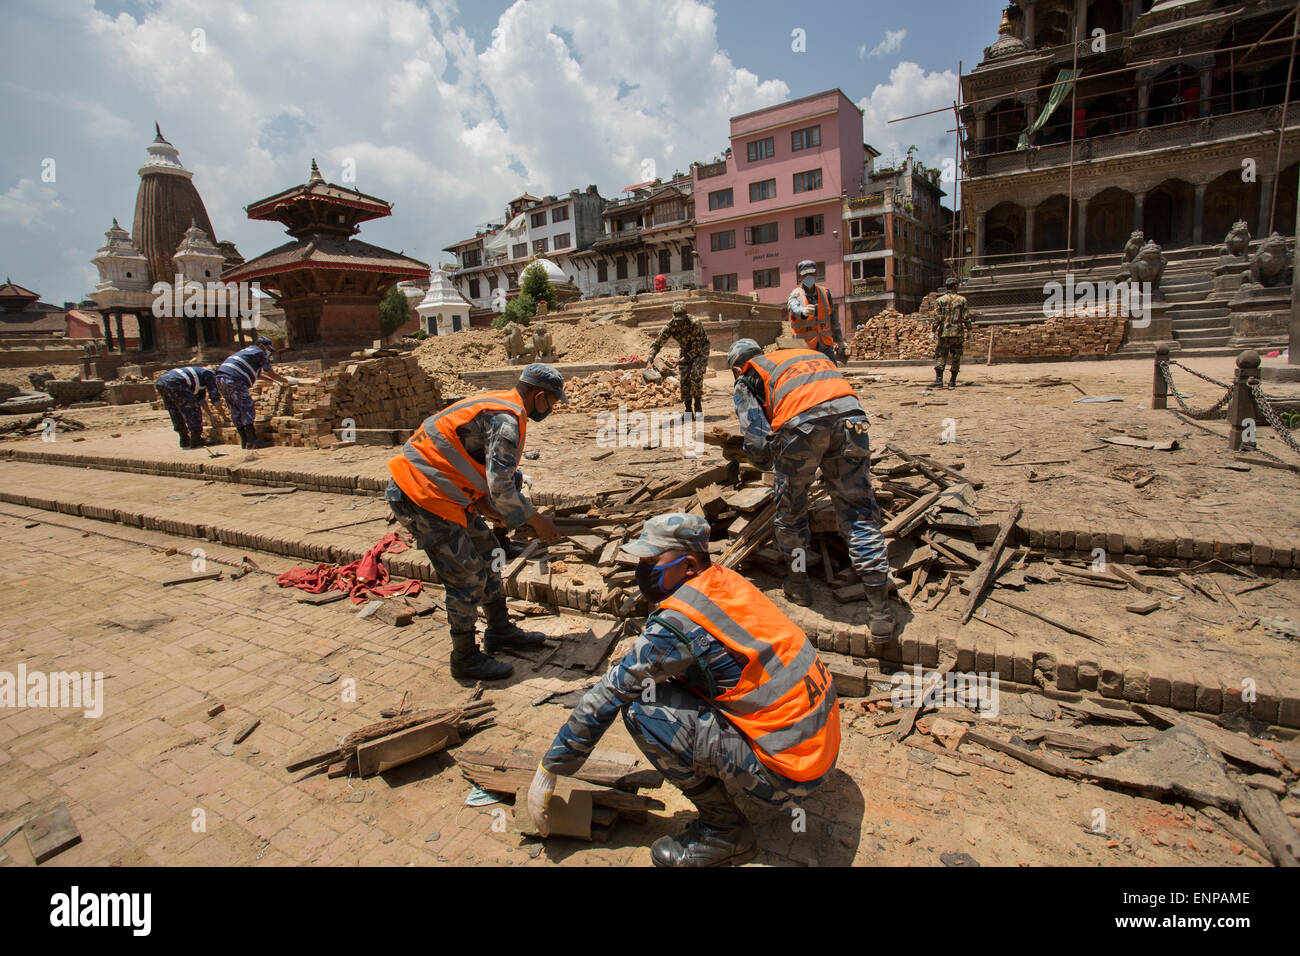 Police clear the rubble in Patan's (Lalitpur's) Durbar Square, which was badly damaged following the 2015 earthquake in Nepal. Stock Photo